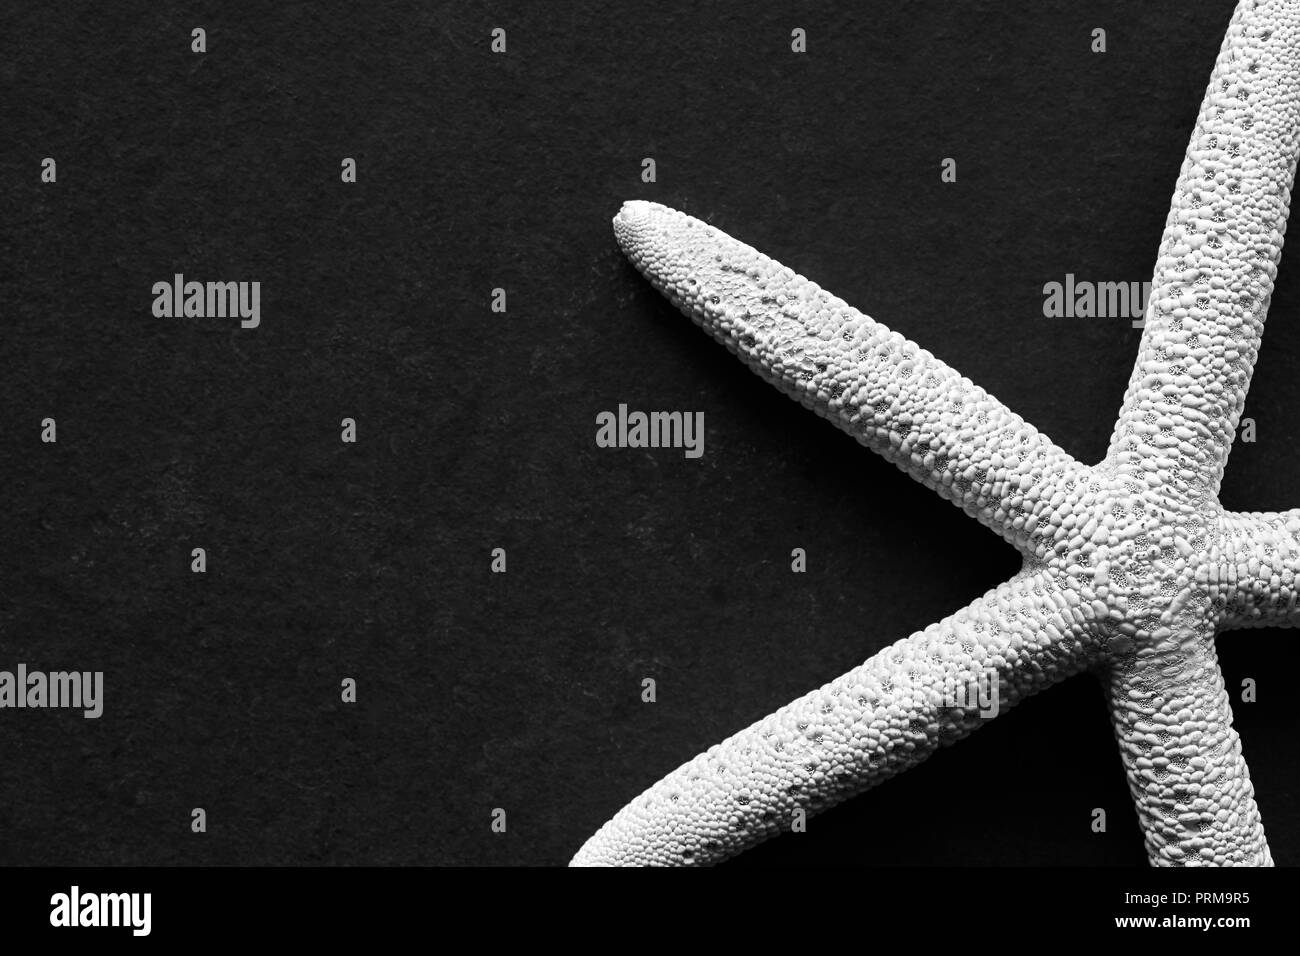 Black and white close up picture of a starfish on a dark background, selective focus. Stock Photo